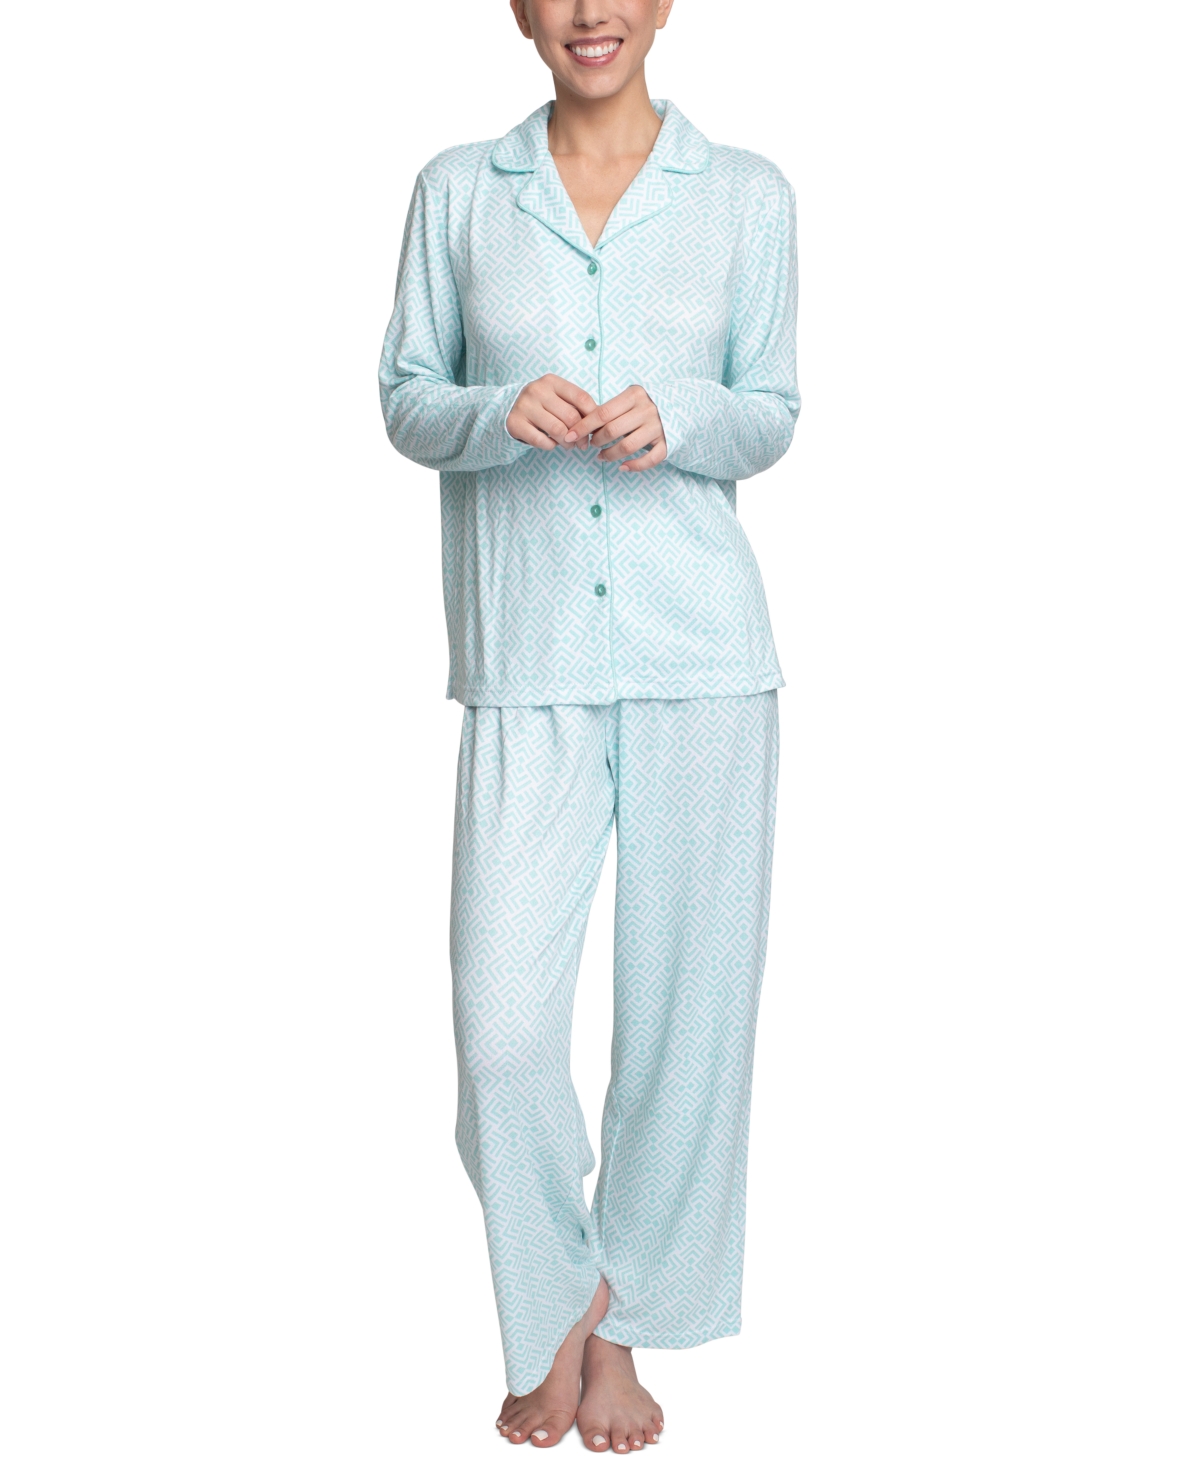 Hanes Women's Relaxed Butter-knit Notch Collar Pajama Set In Aqua Tile Print